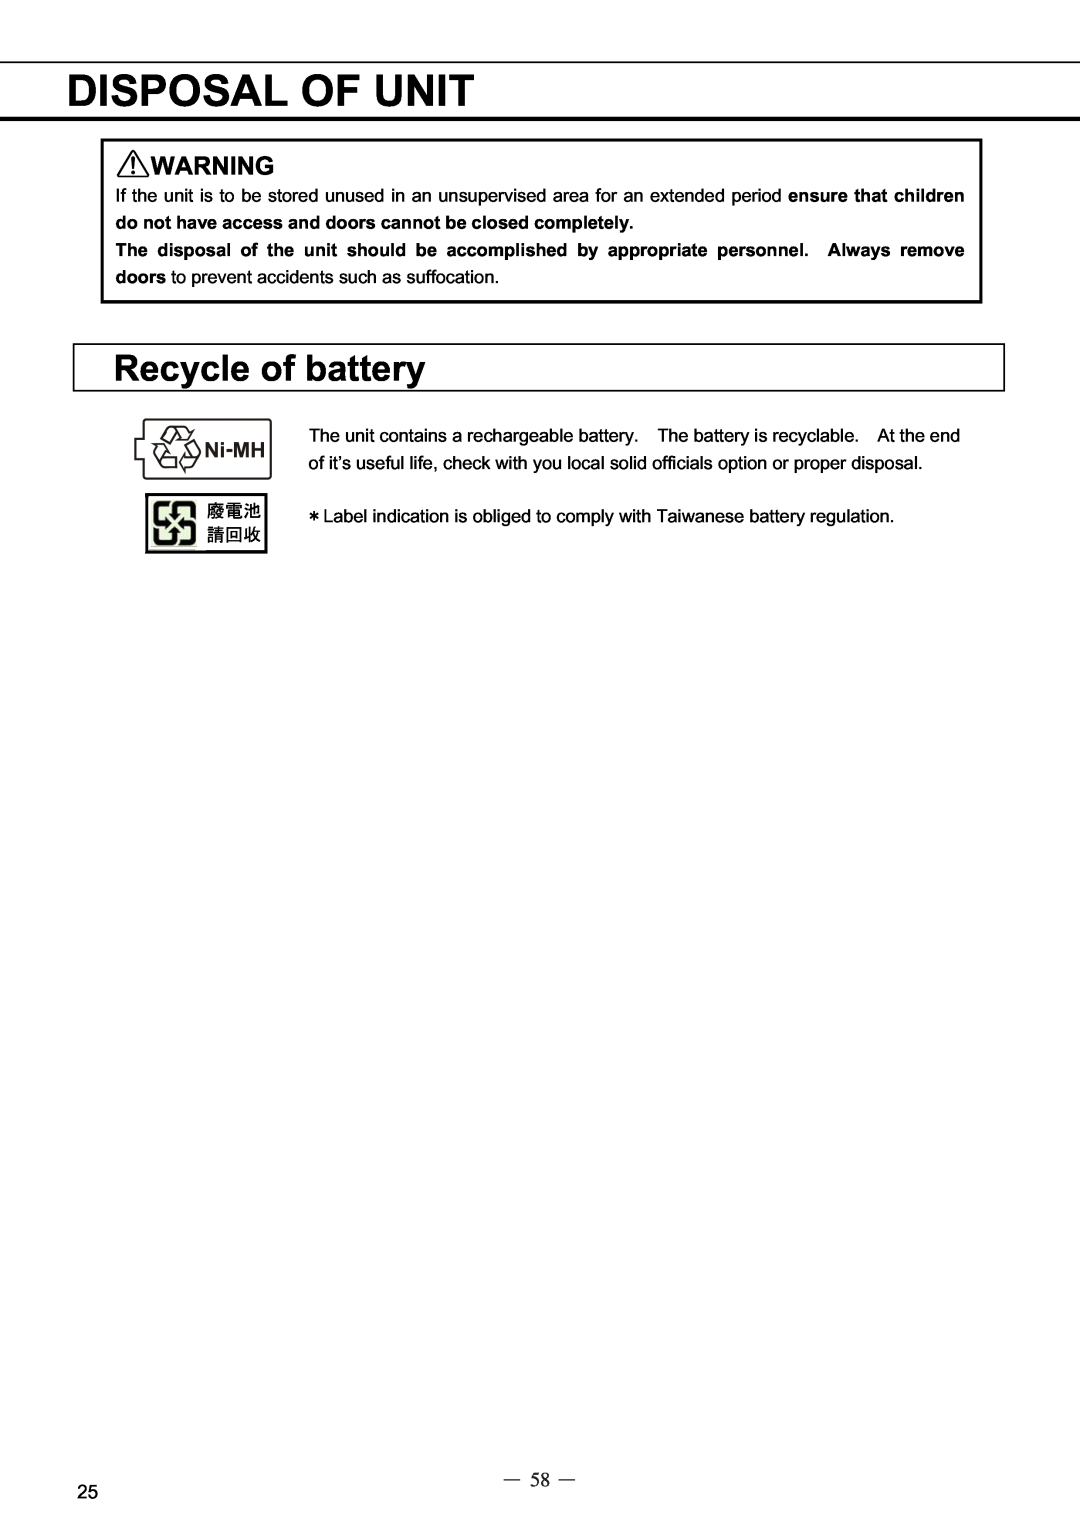 Sanyo MDF-C8V service manual Disposal Of Unit, Recycle of battery 